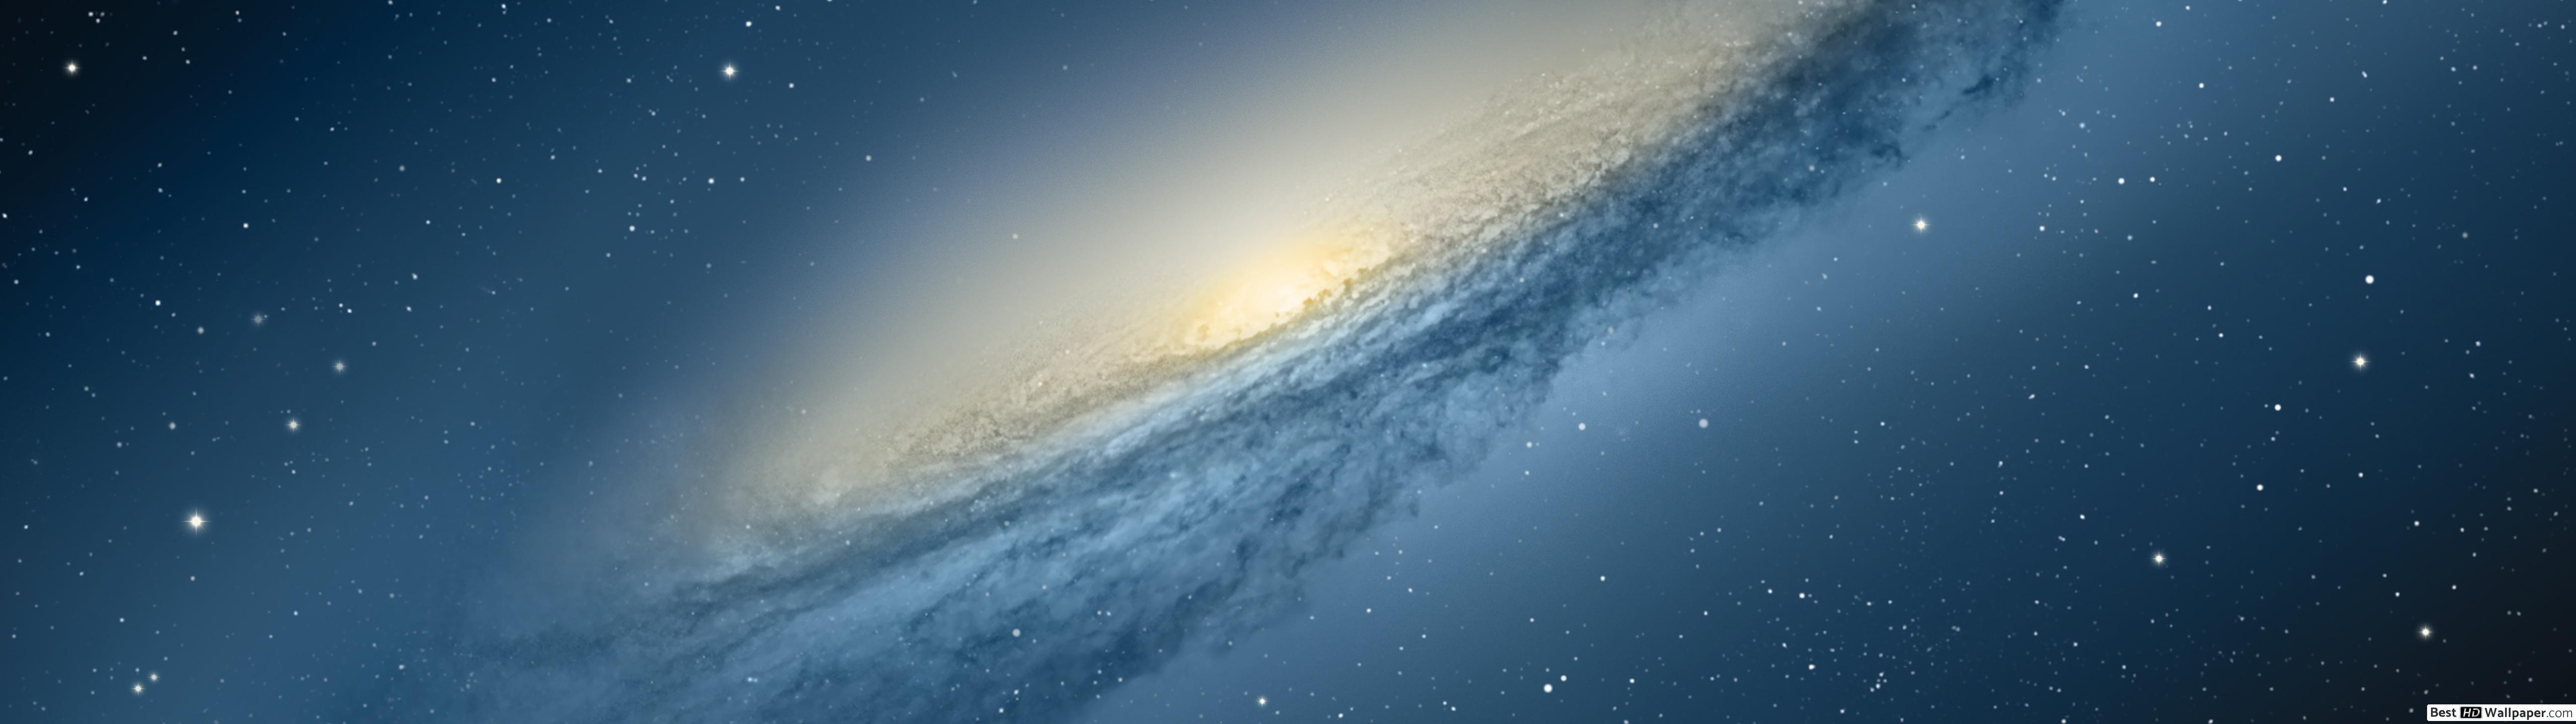 Ultrawide Wallpaper 5120X1440 Space : 5120x1440 Space Wallpapers - Top